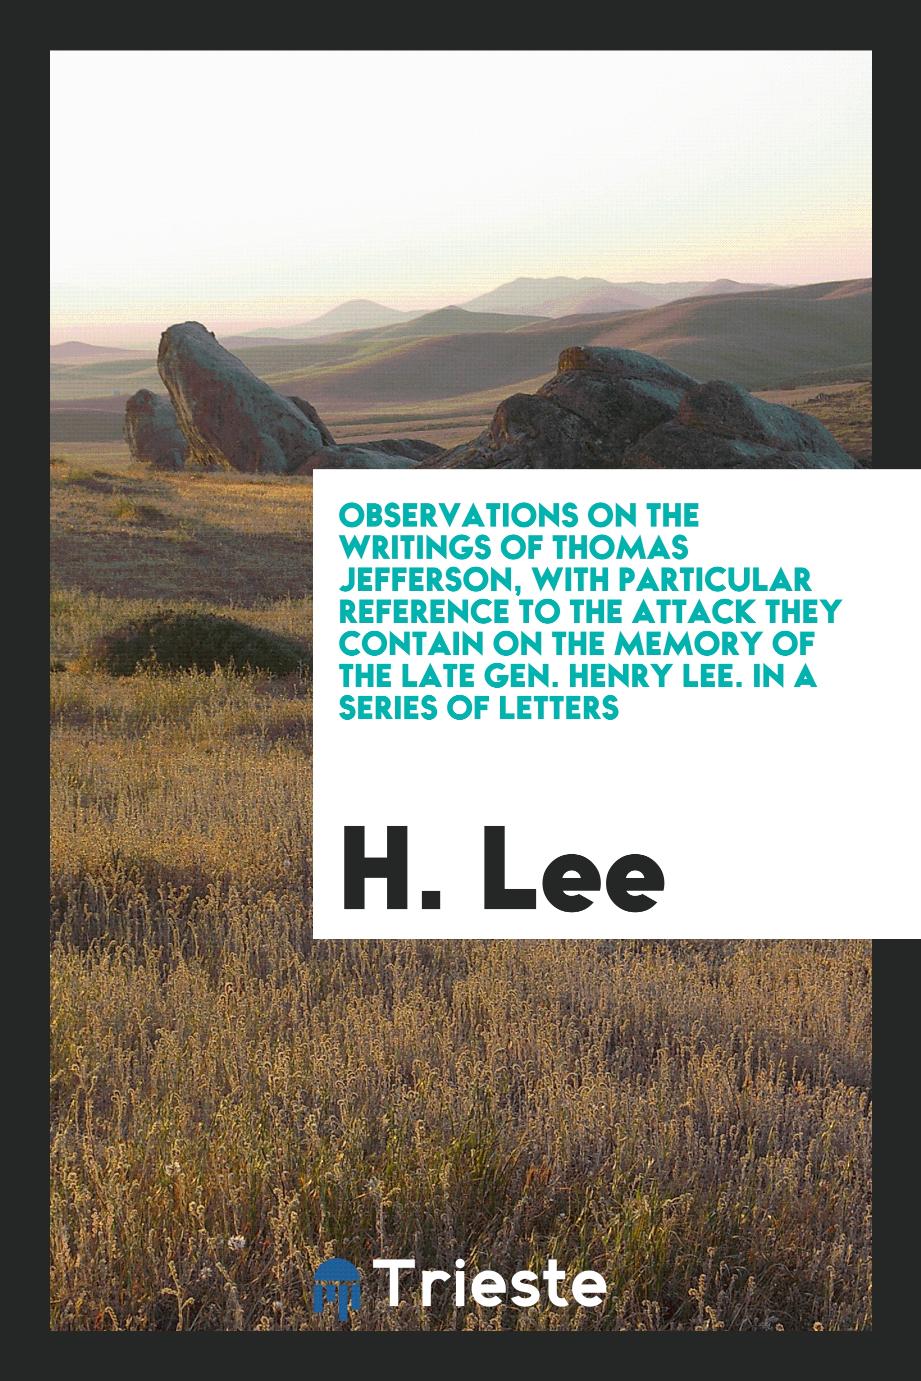 Observations on the writings of Thomas Jefferson, with particular reference to the attack they contain on the memory of the late Gen. Henry Lee. In a series of letters